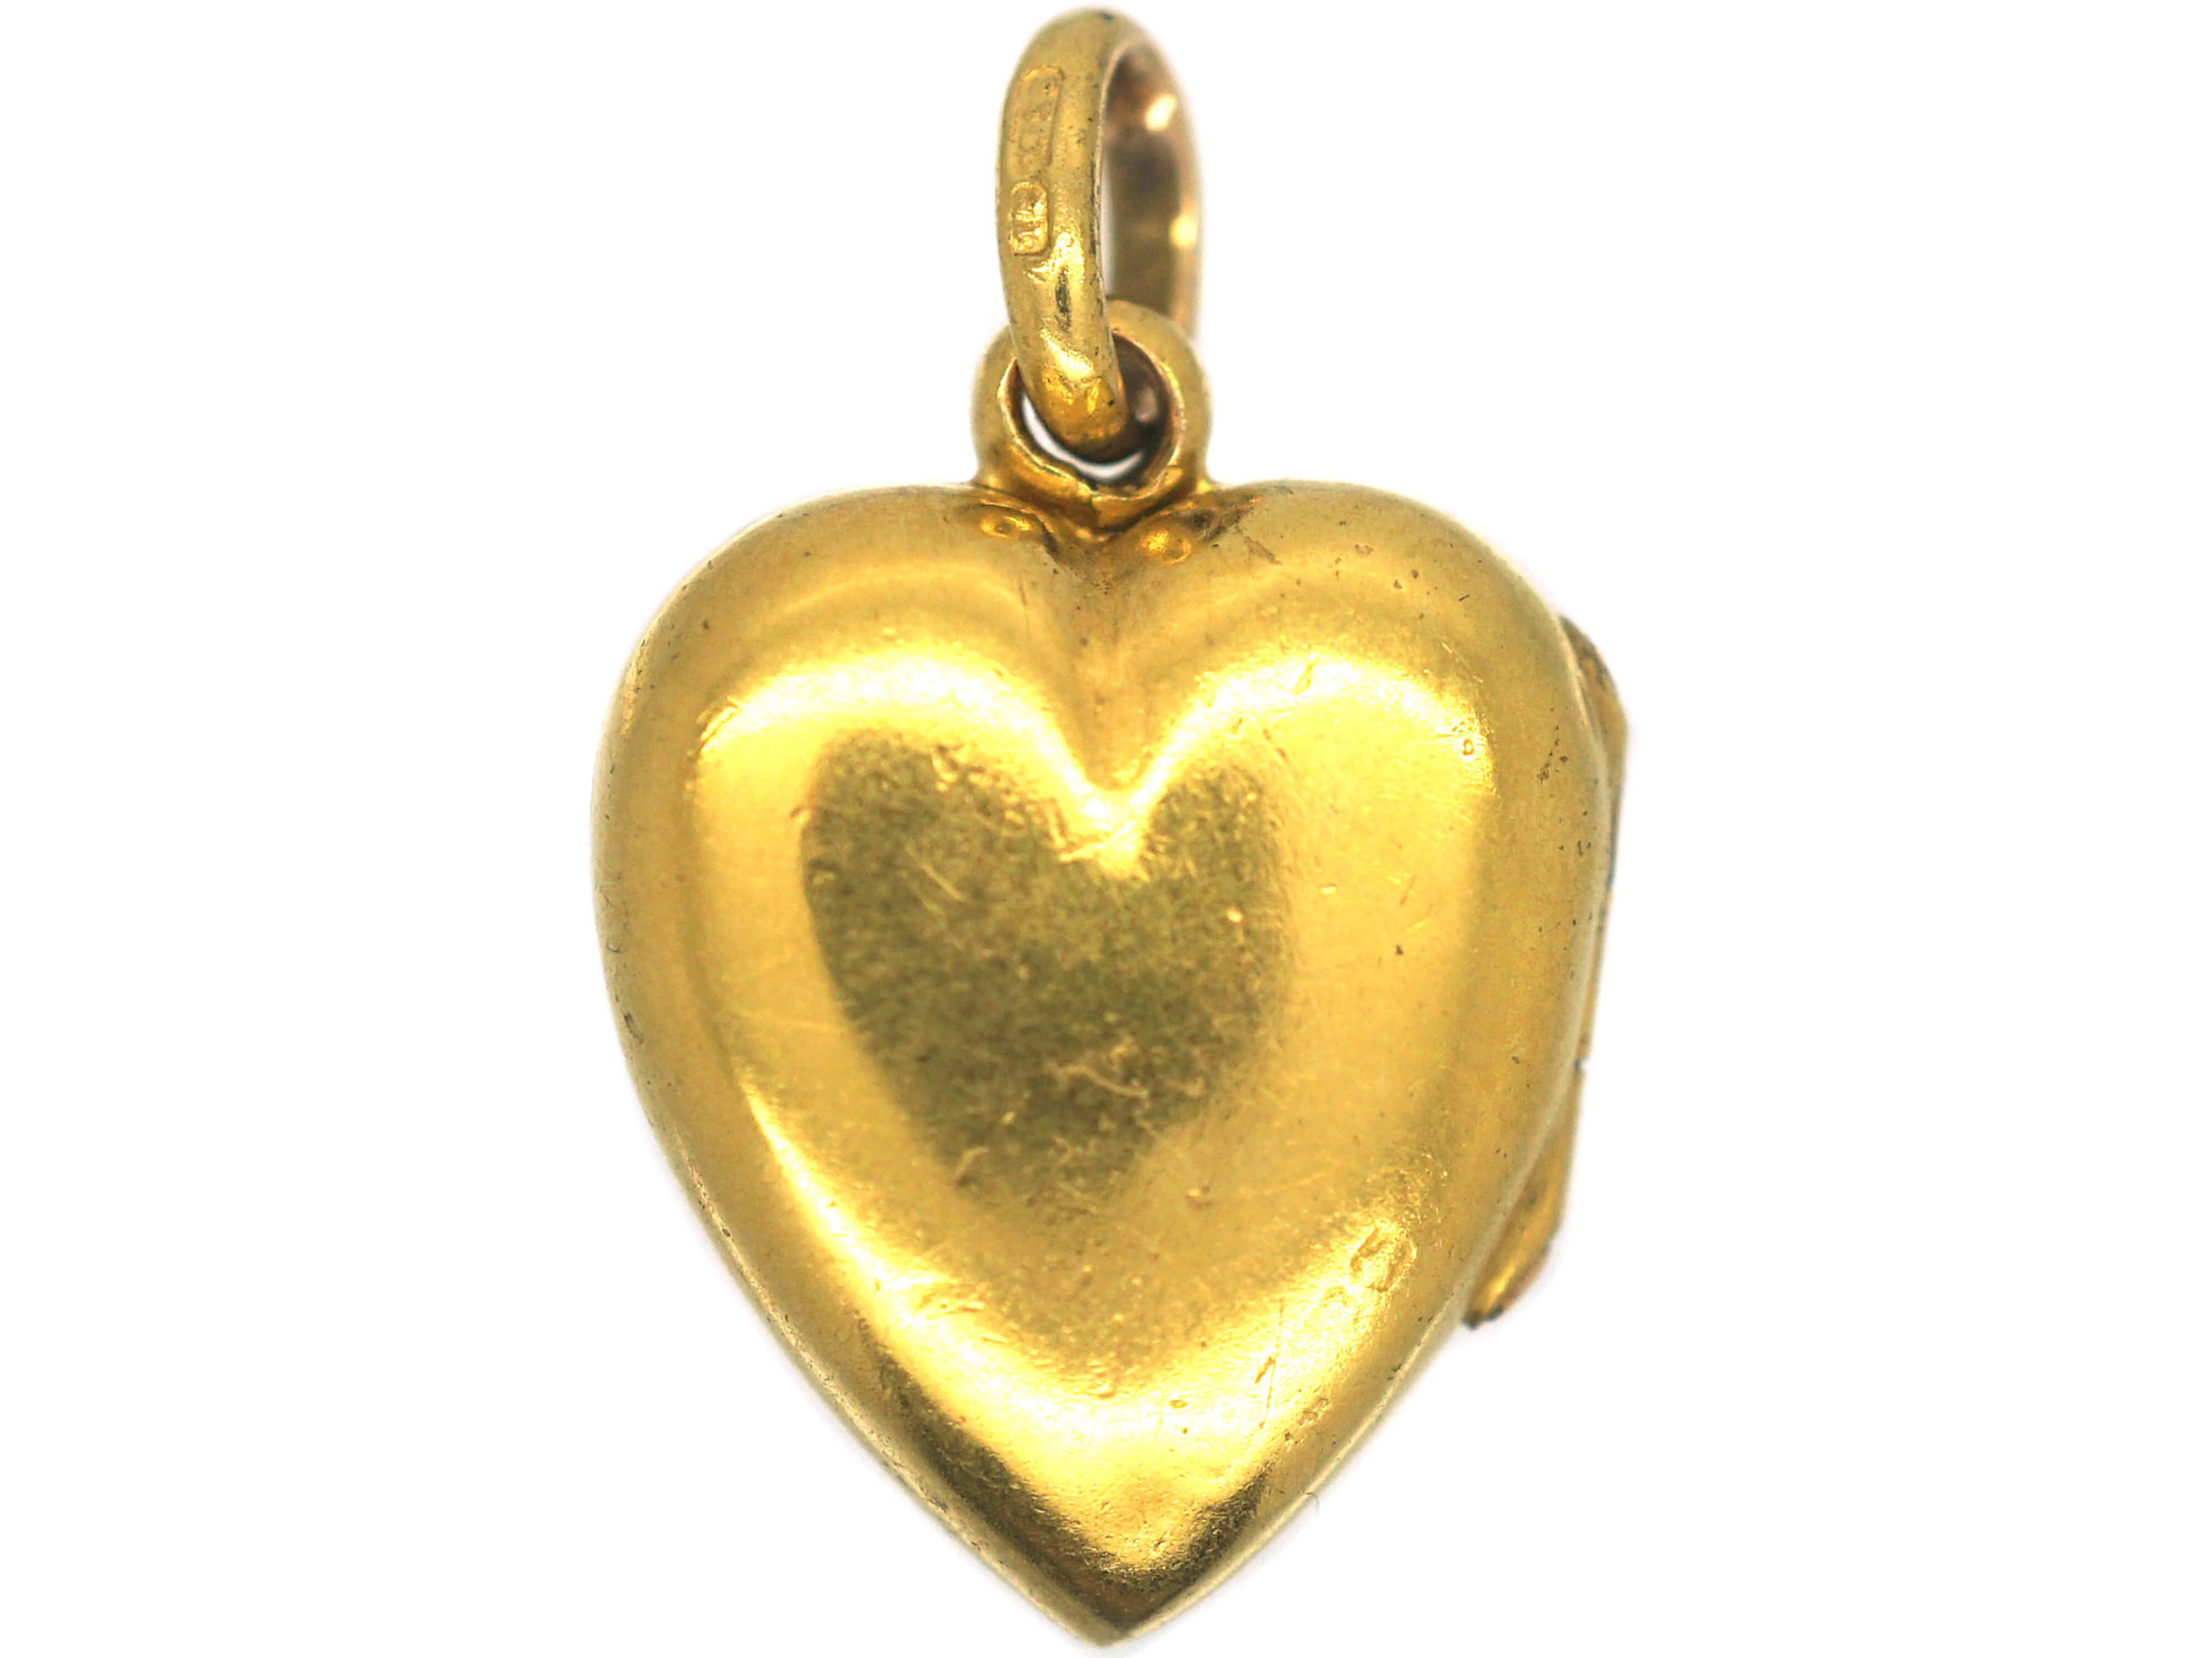 Edwardian 15ct Gold & Ruby Heart Shaped Locket (677P) | The Antique ...